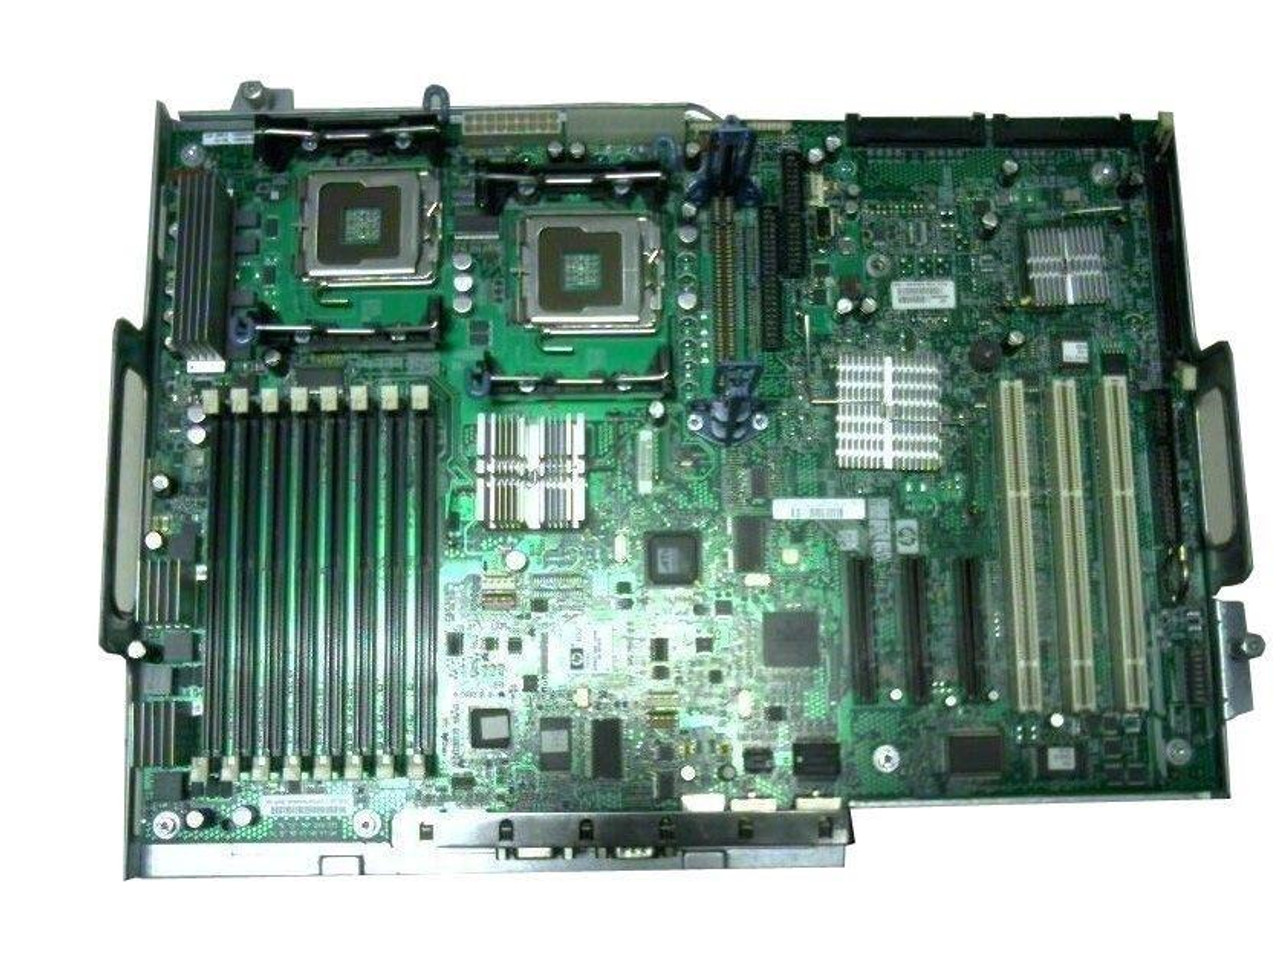 413984-001 - HP System Board (MotherBoard) for ProLiant ML350 G5 Server